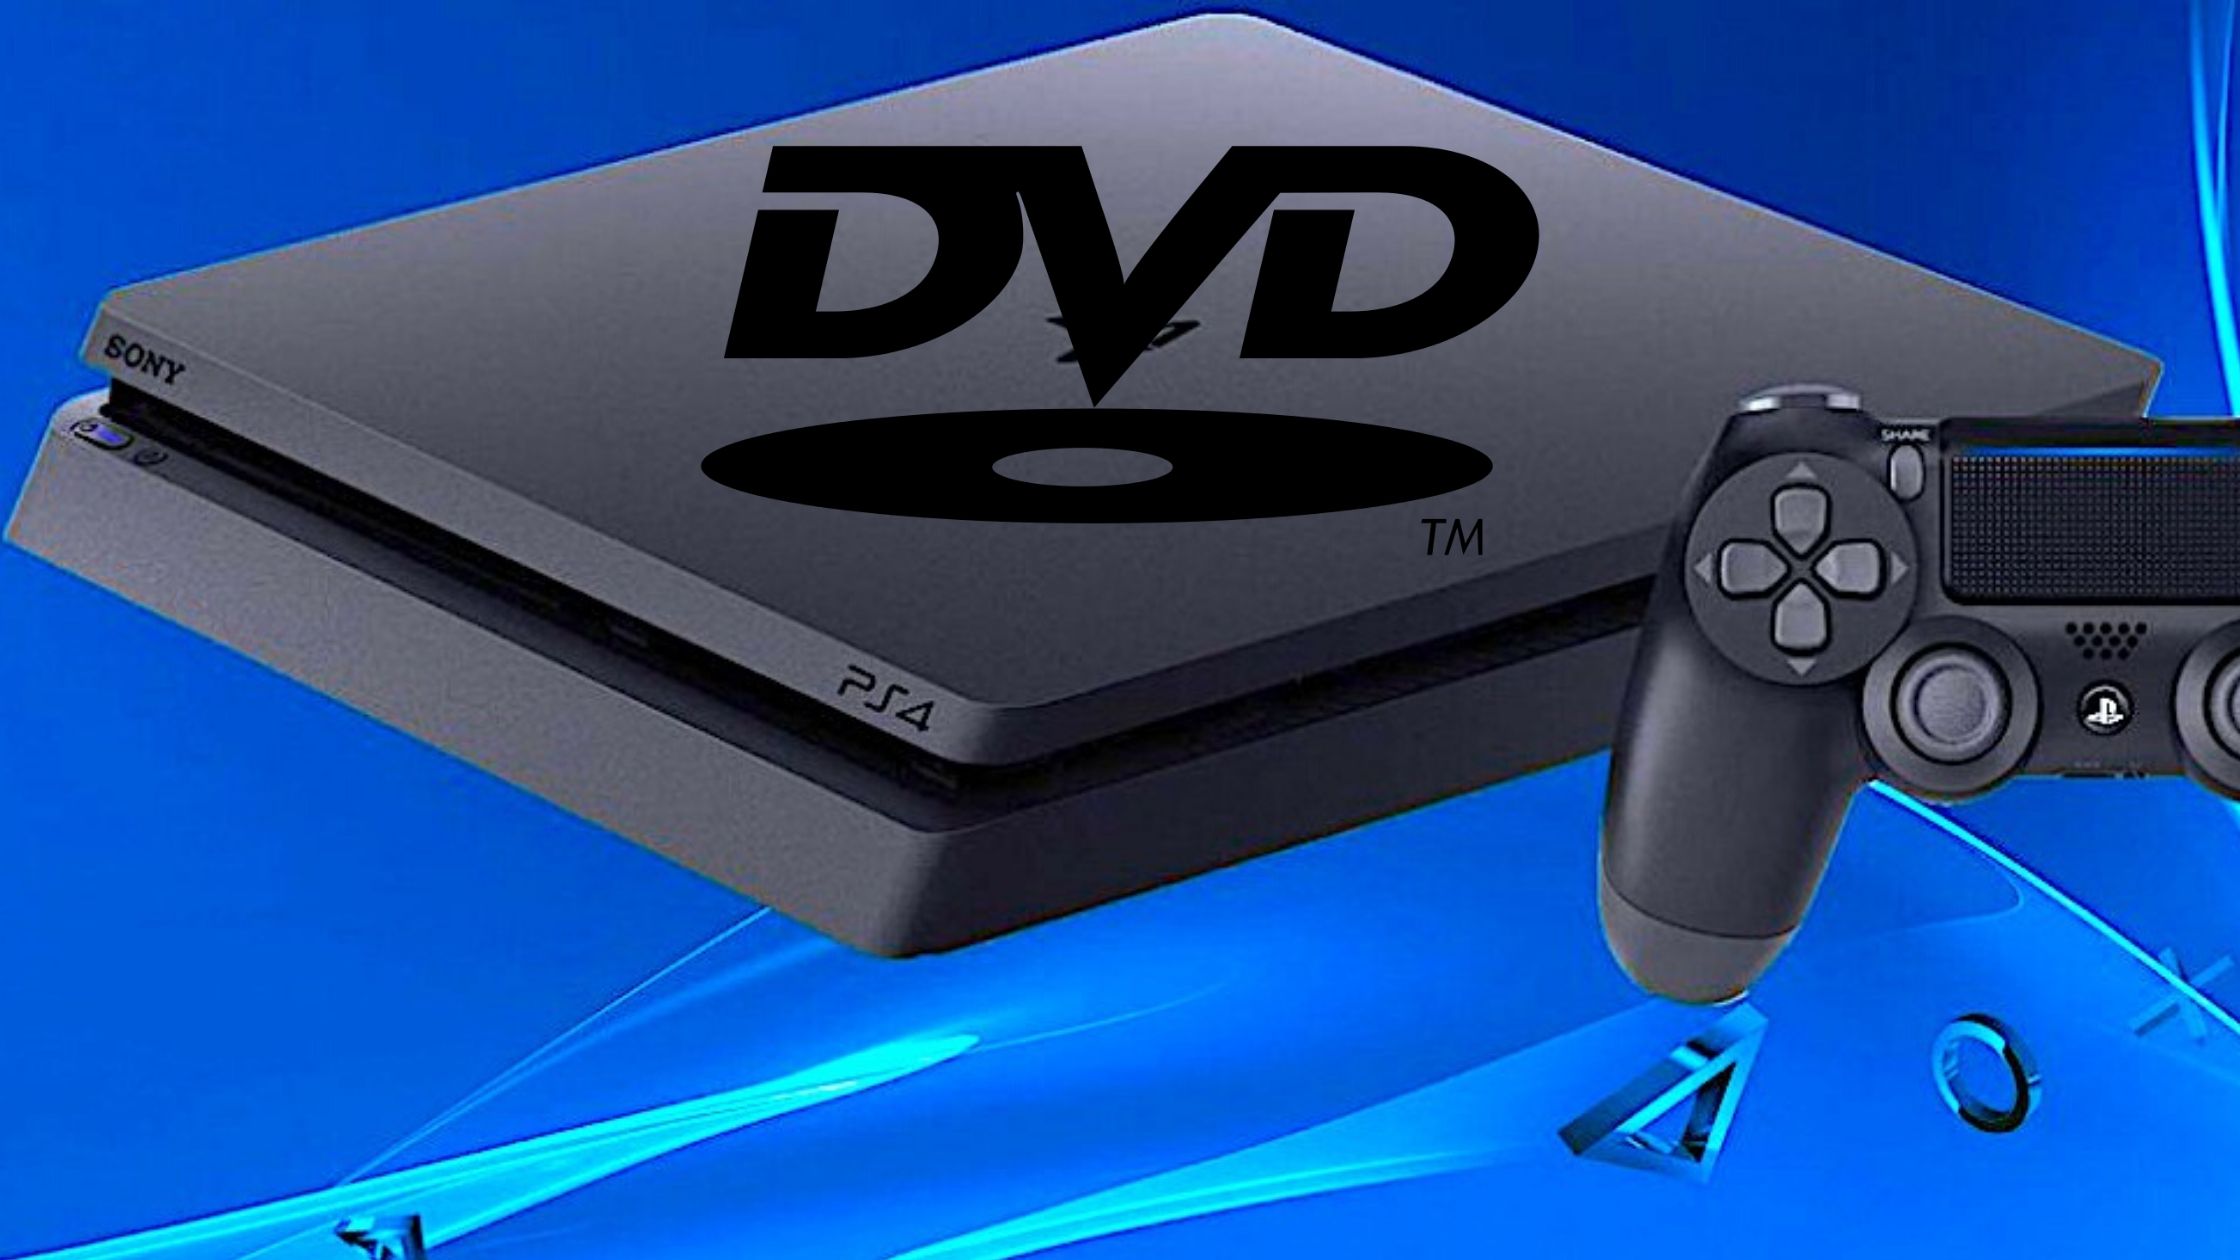 Does the PS4 play DVD